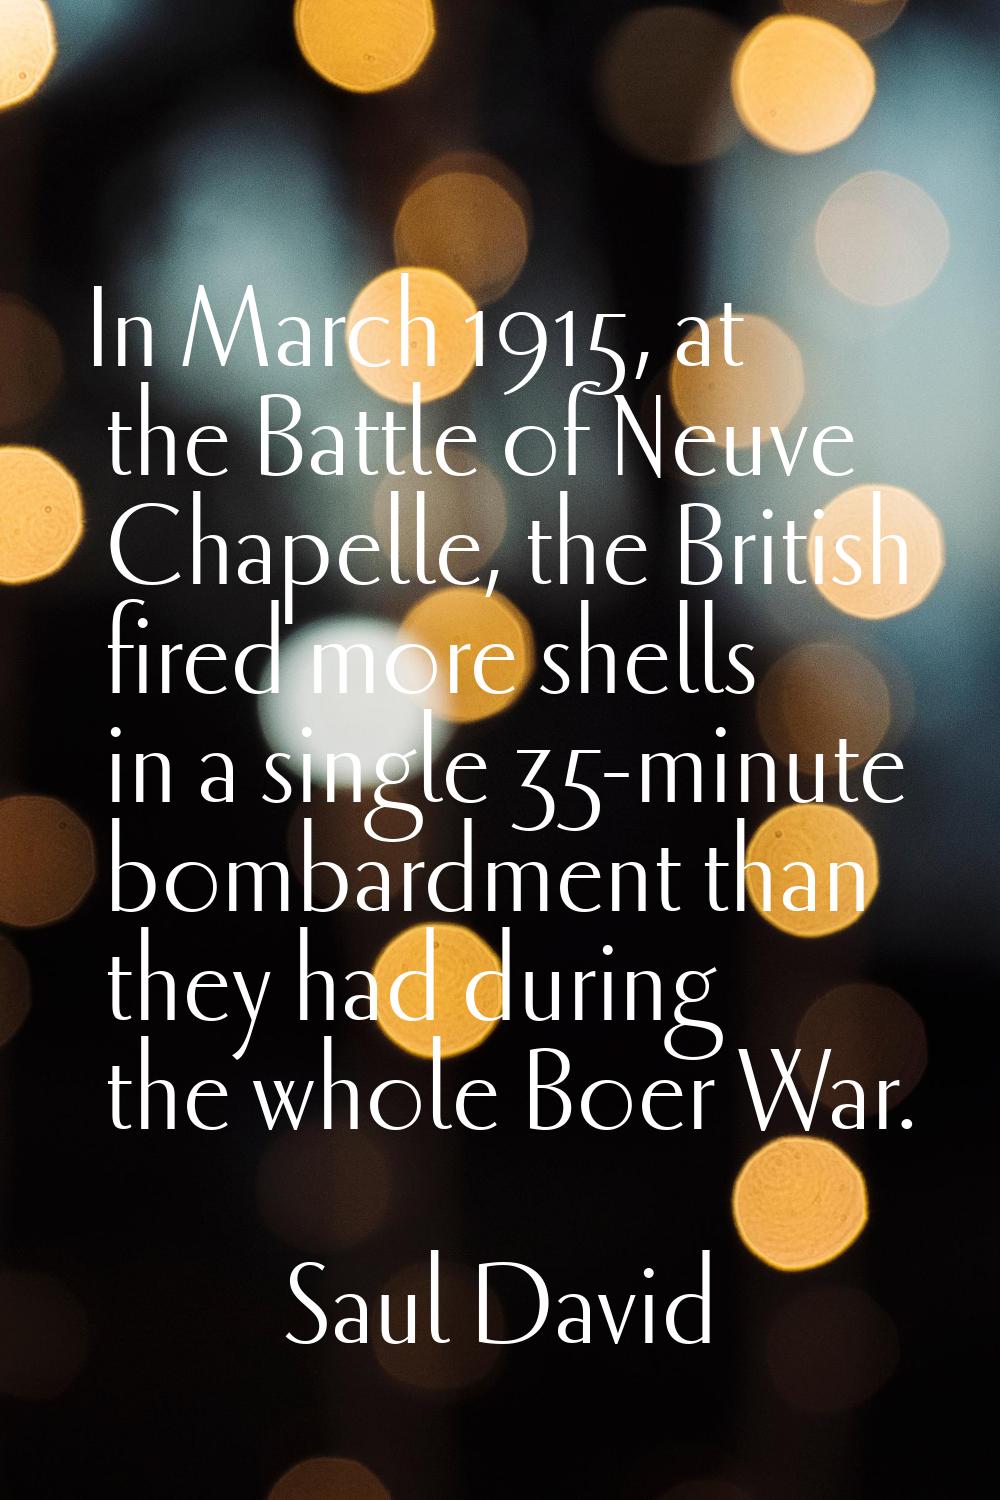 In March 1915, at the Battle of Neuve Chapelle, the British fired more shells in a single 35-minute